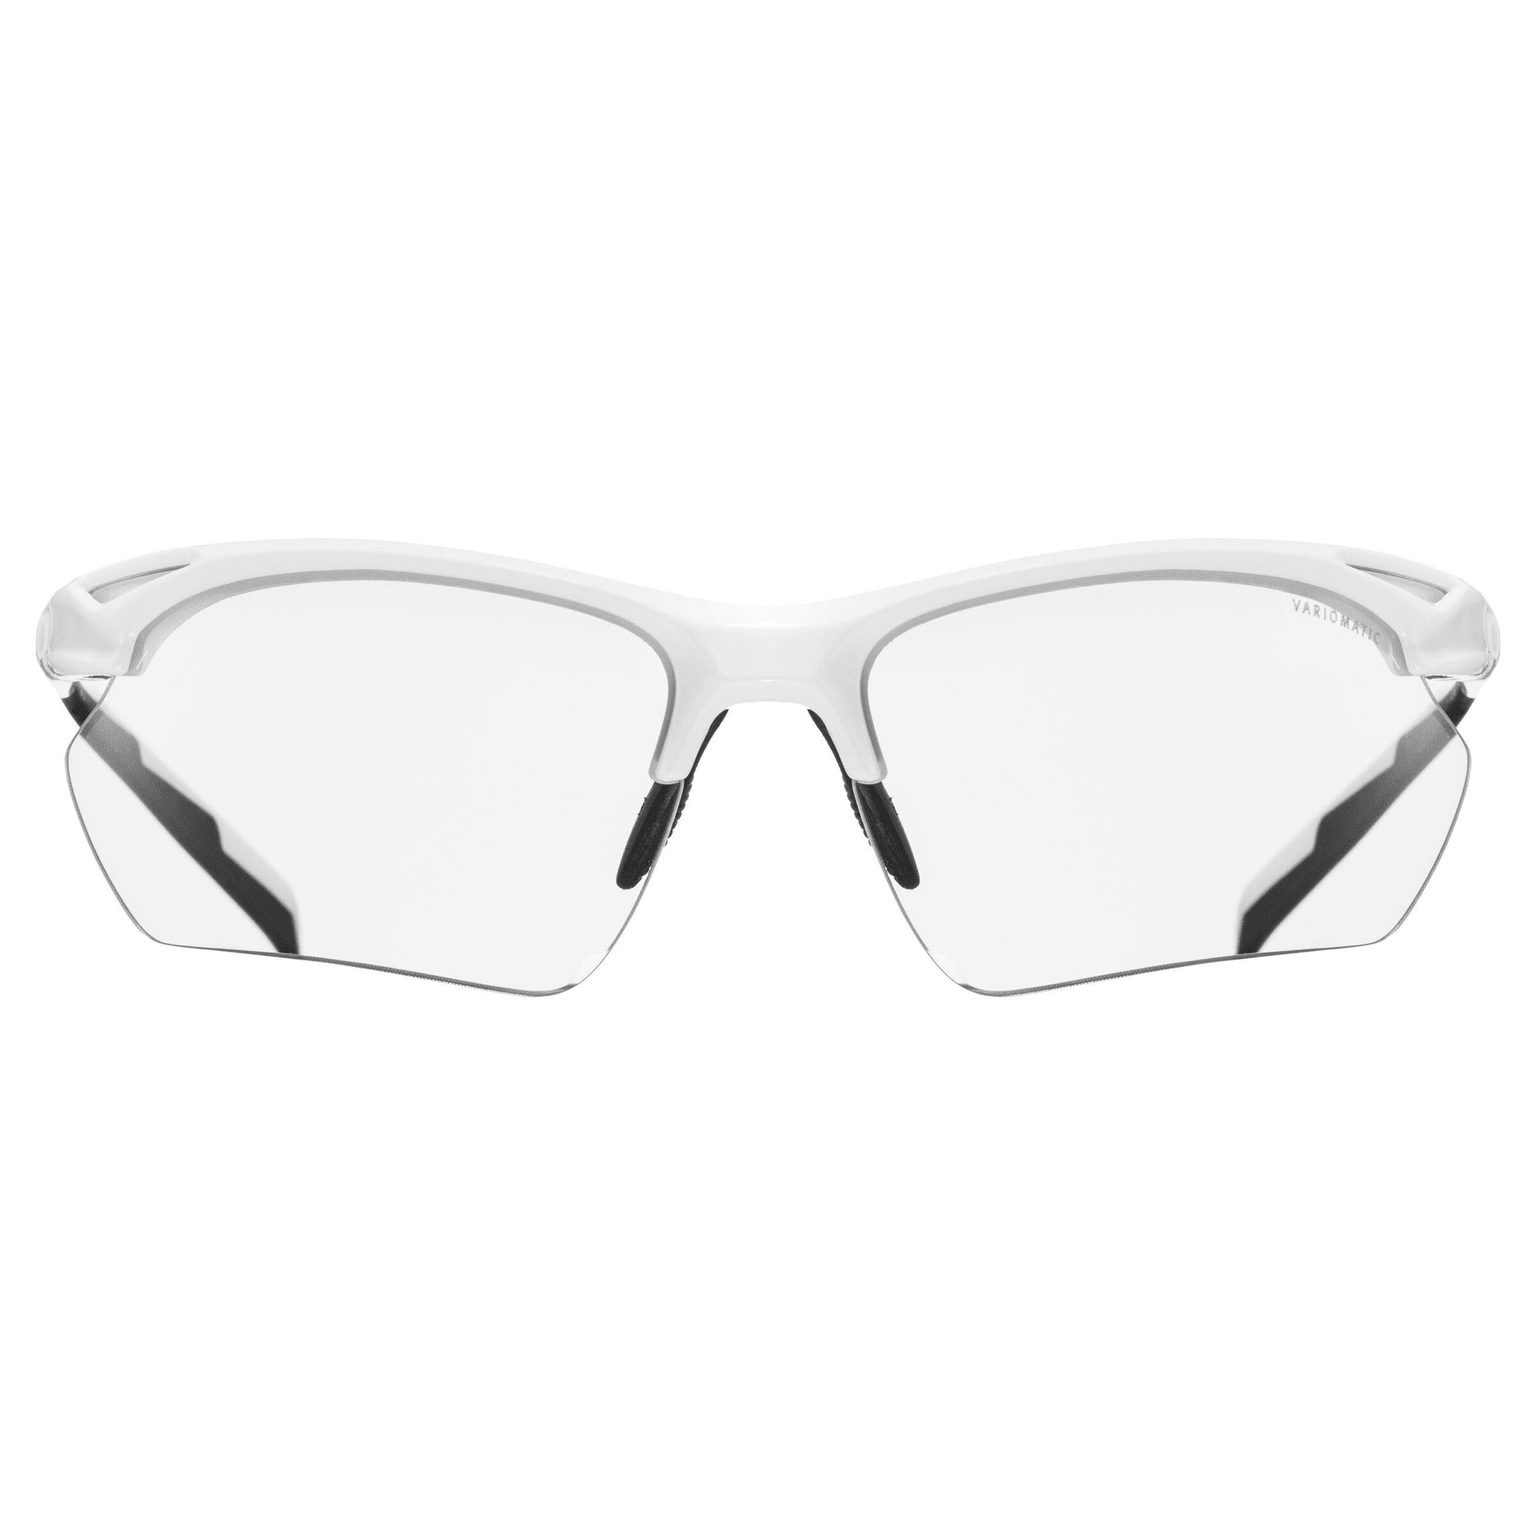 Uvex Uvex Sportstyle 802 V small Lunettes de sport blanc 5